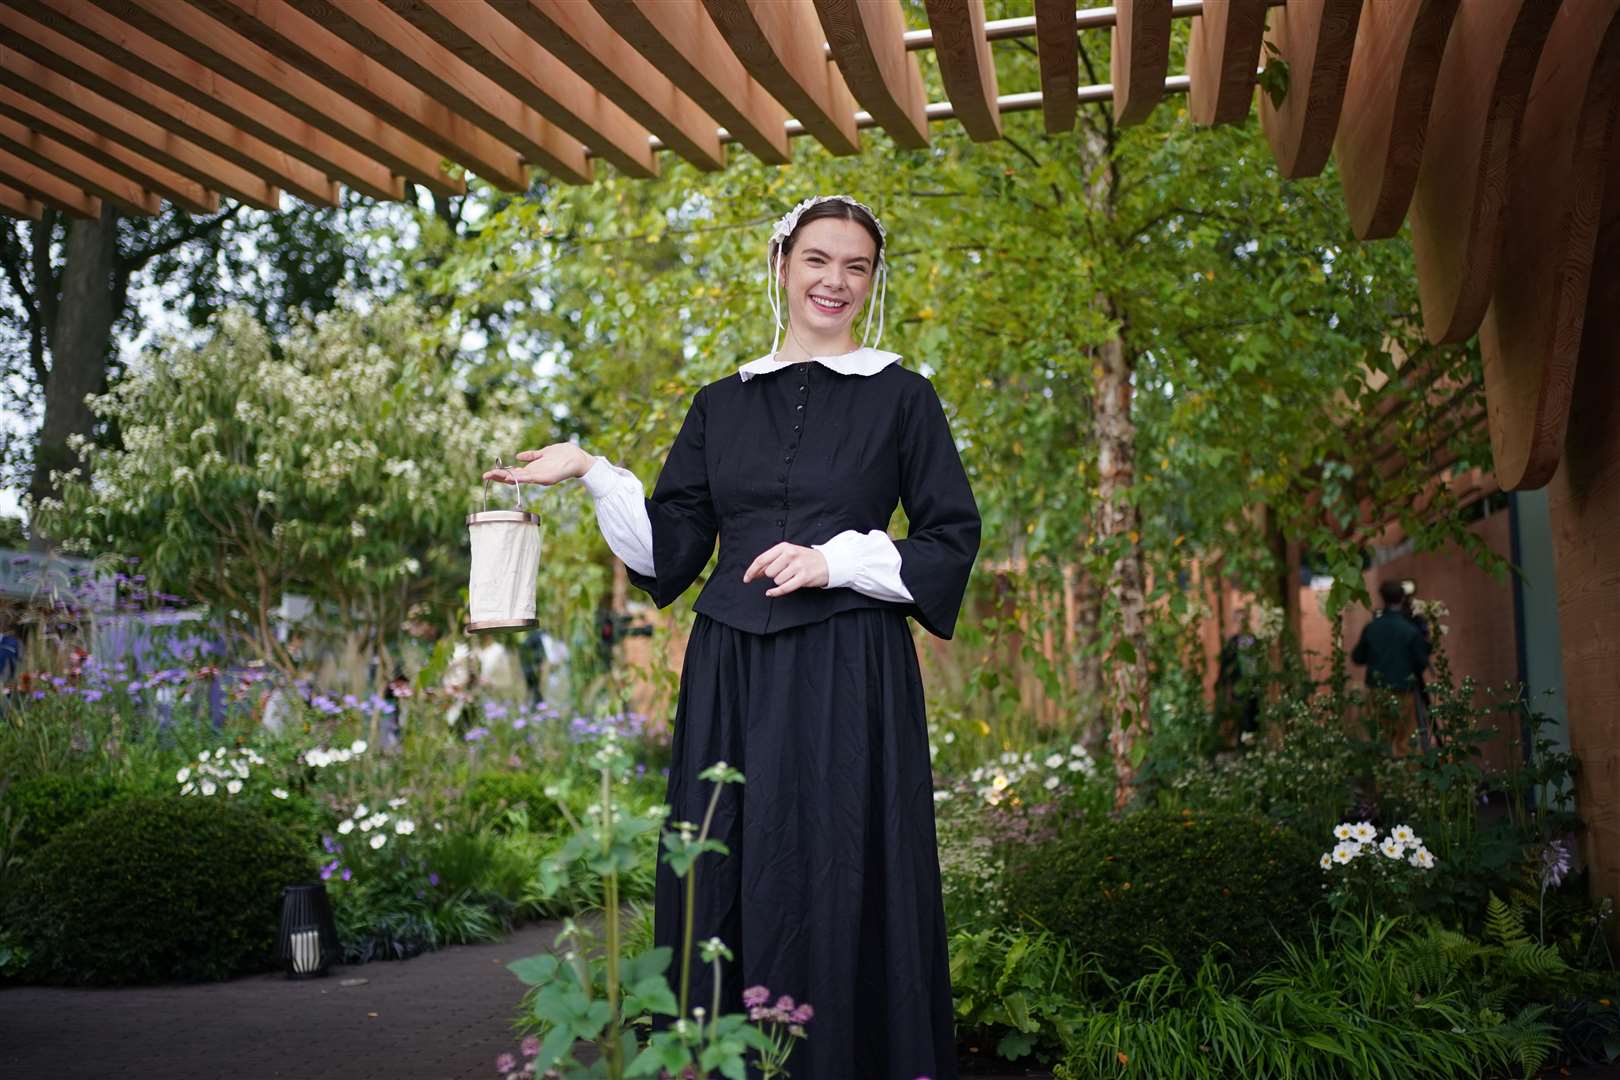 A woman dressed as Florence Nightingale in the Florence Nightingale garden at the RHS Chelsea Flower Show (Yui Mok/PA)